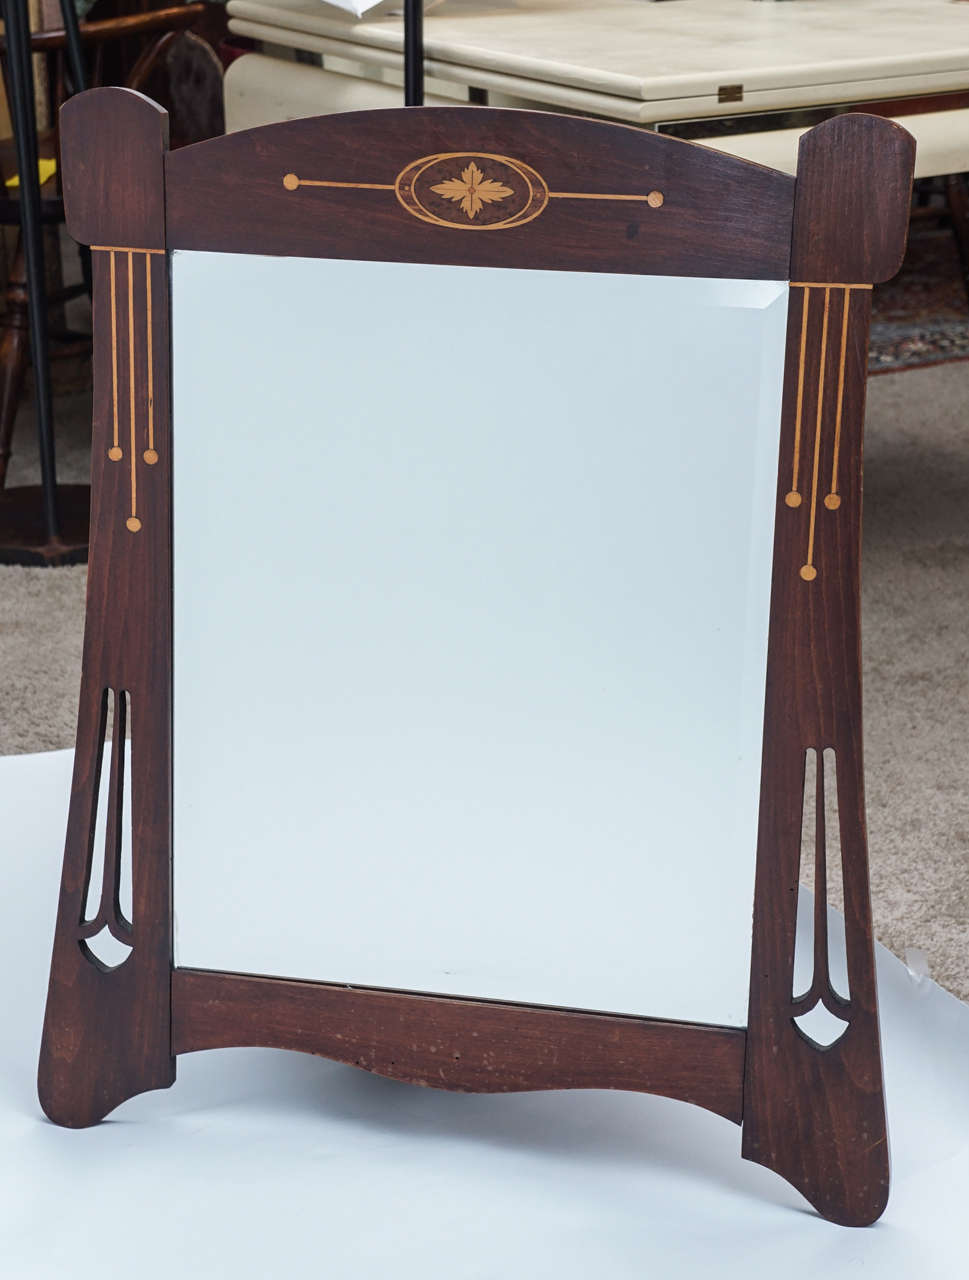 Stunning shape on this early 20th century frame with later beveled mirror. There are at least two additional woods in the inlaid motif. Cut-out design is reminiscent of the Scottish influence on Arts and Crafts design.